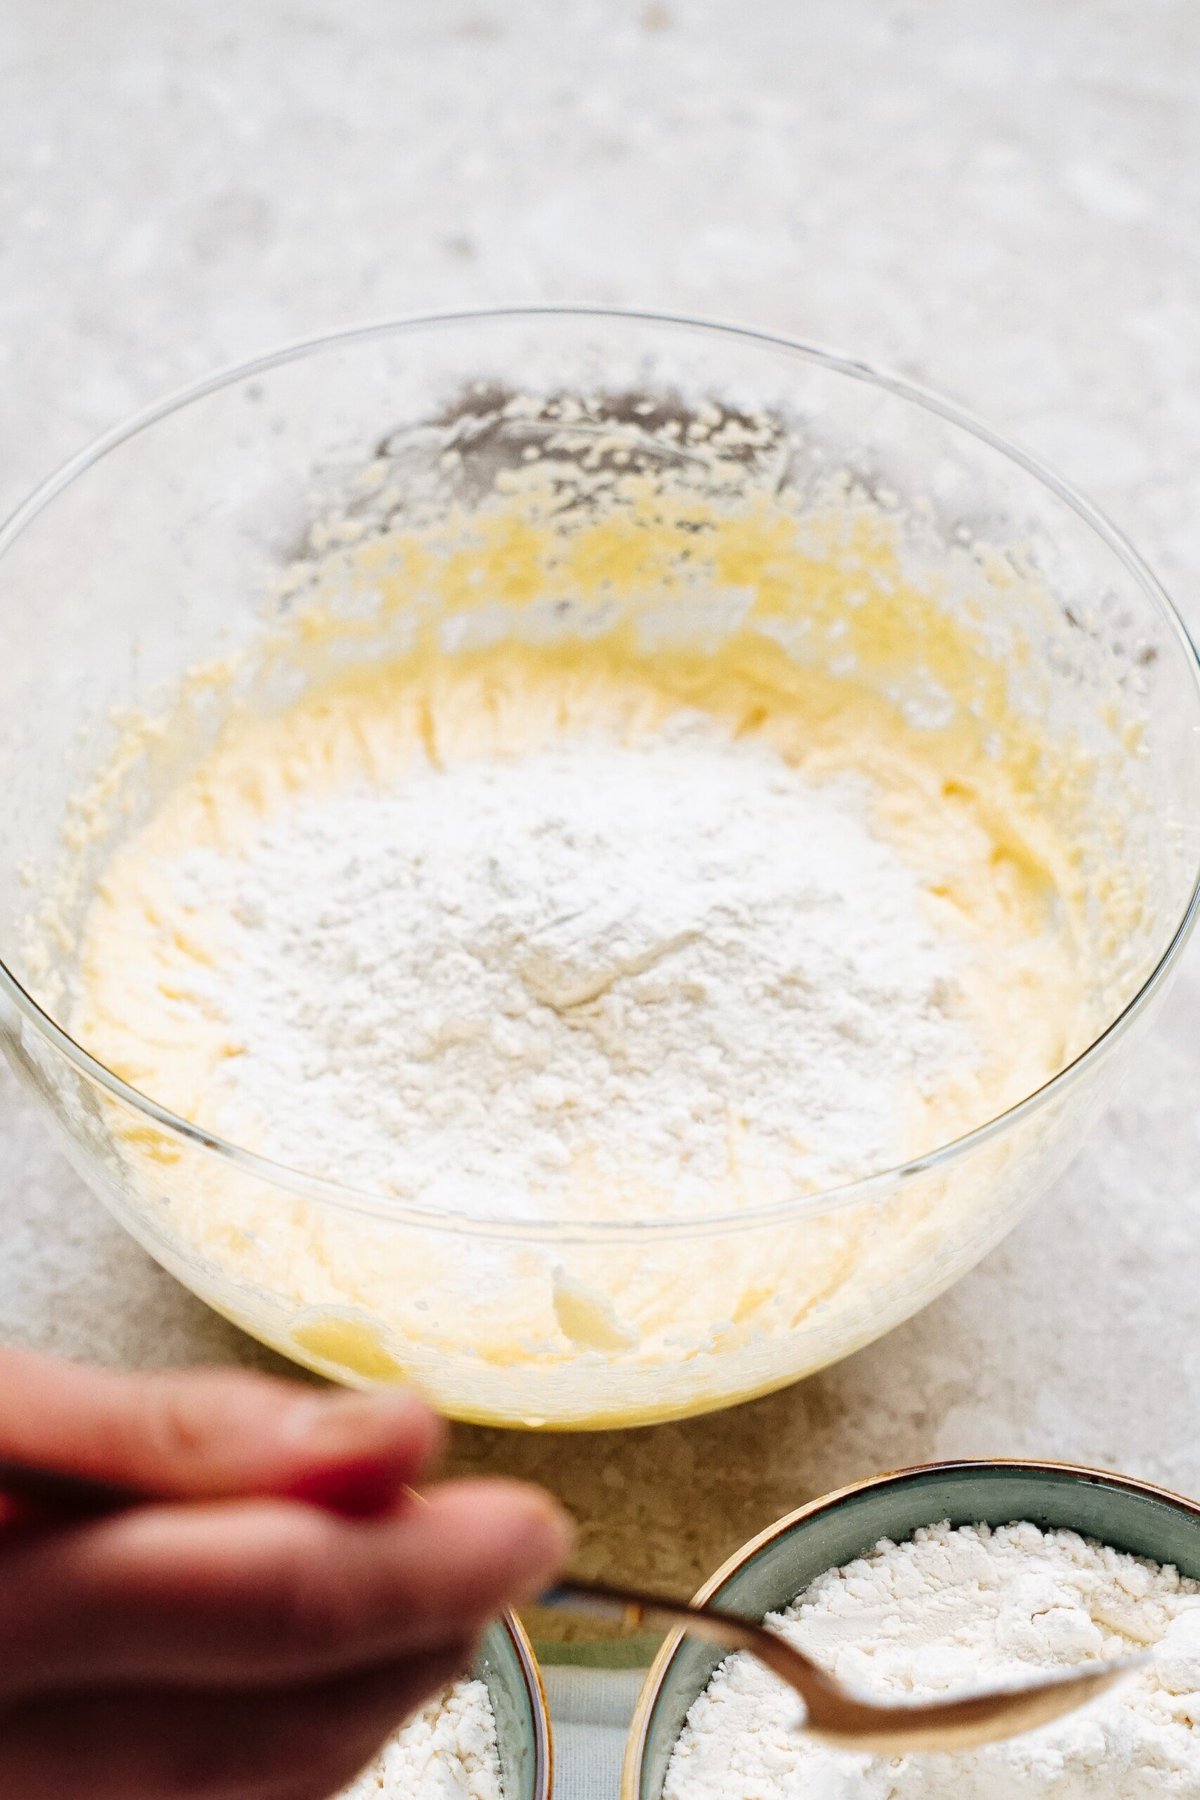 A bowl containing a mixture of creamed butter and sugar, with flour being added on top. A hand holding a spoon is visible in the foreground.